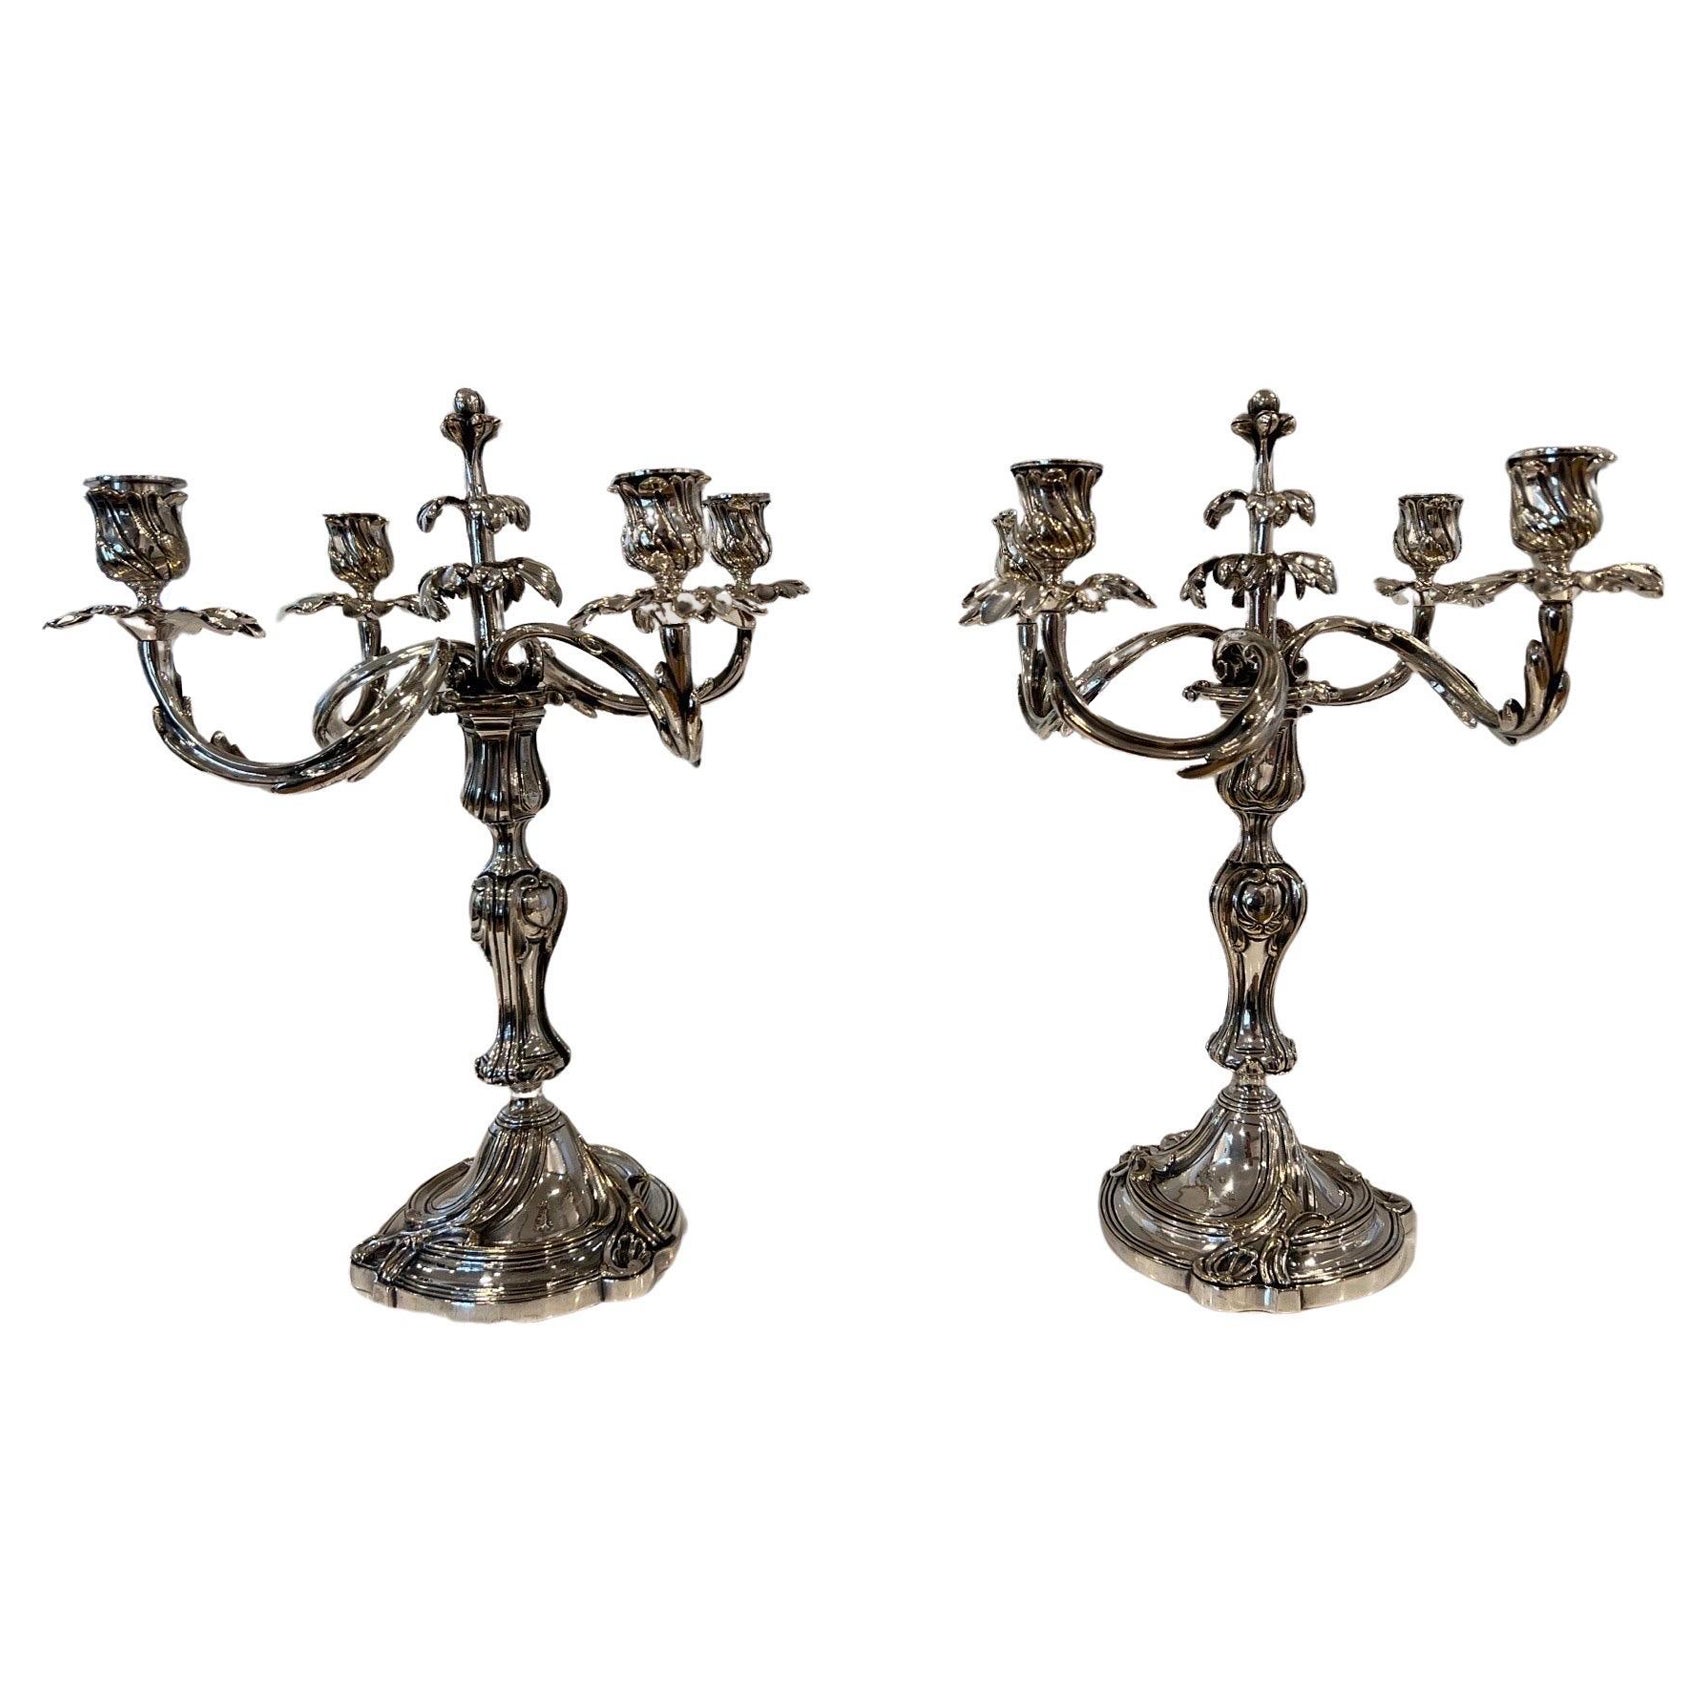 A Pair of French Christofle "Trianon" Silver Plate Candelabra For Sale